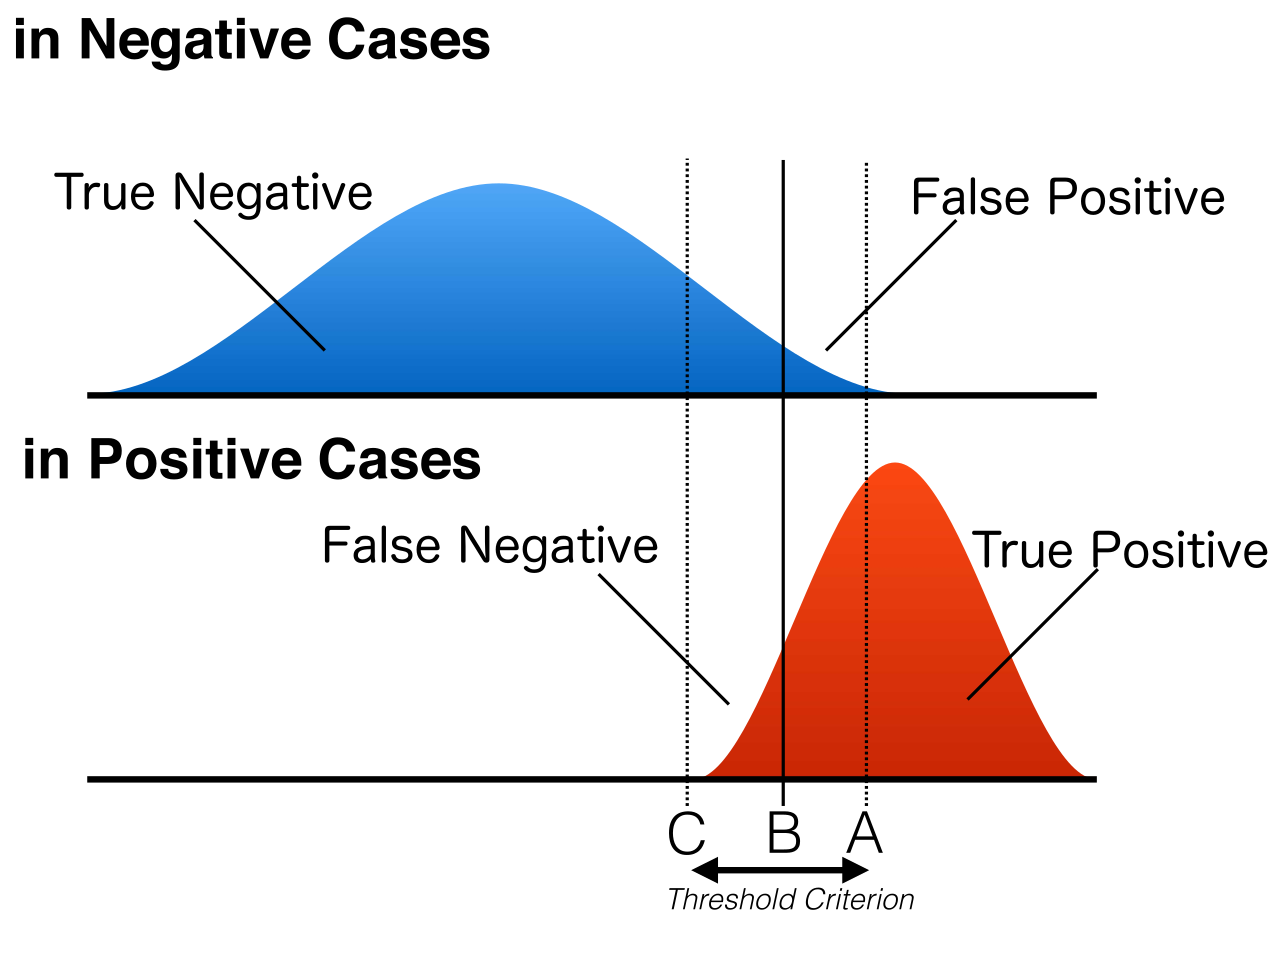 Distributions_of_the_Observed_signal_strength_v2.svg.png